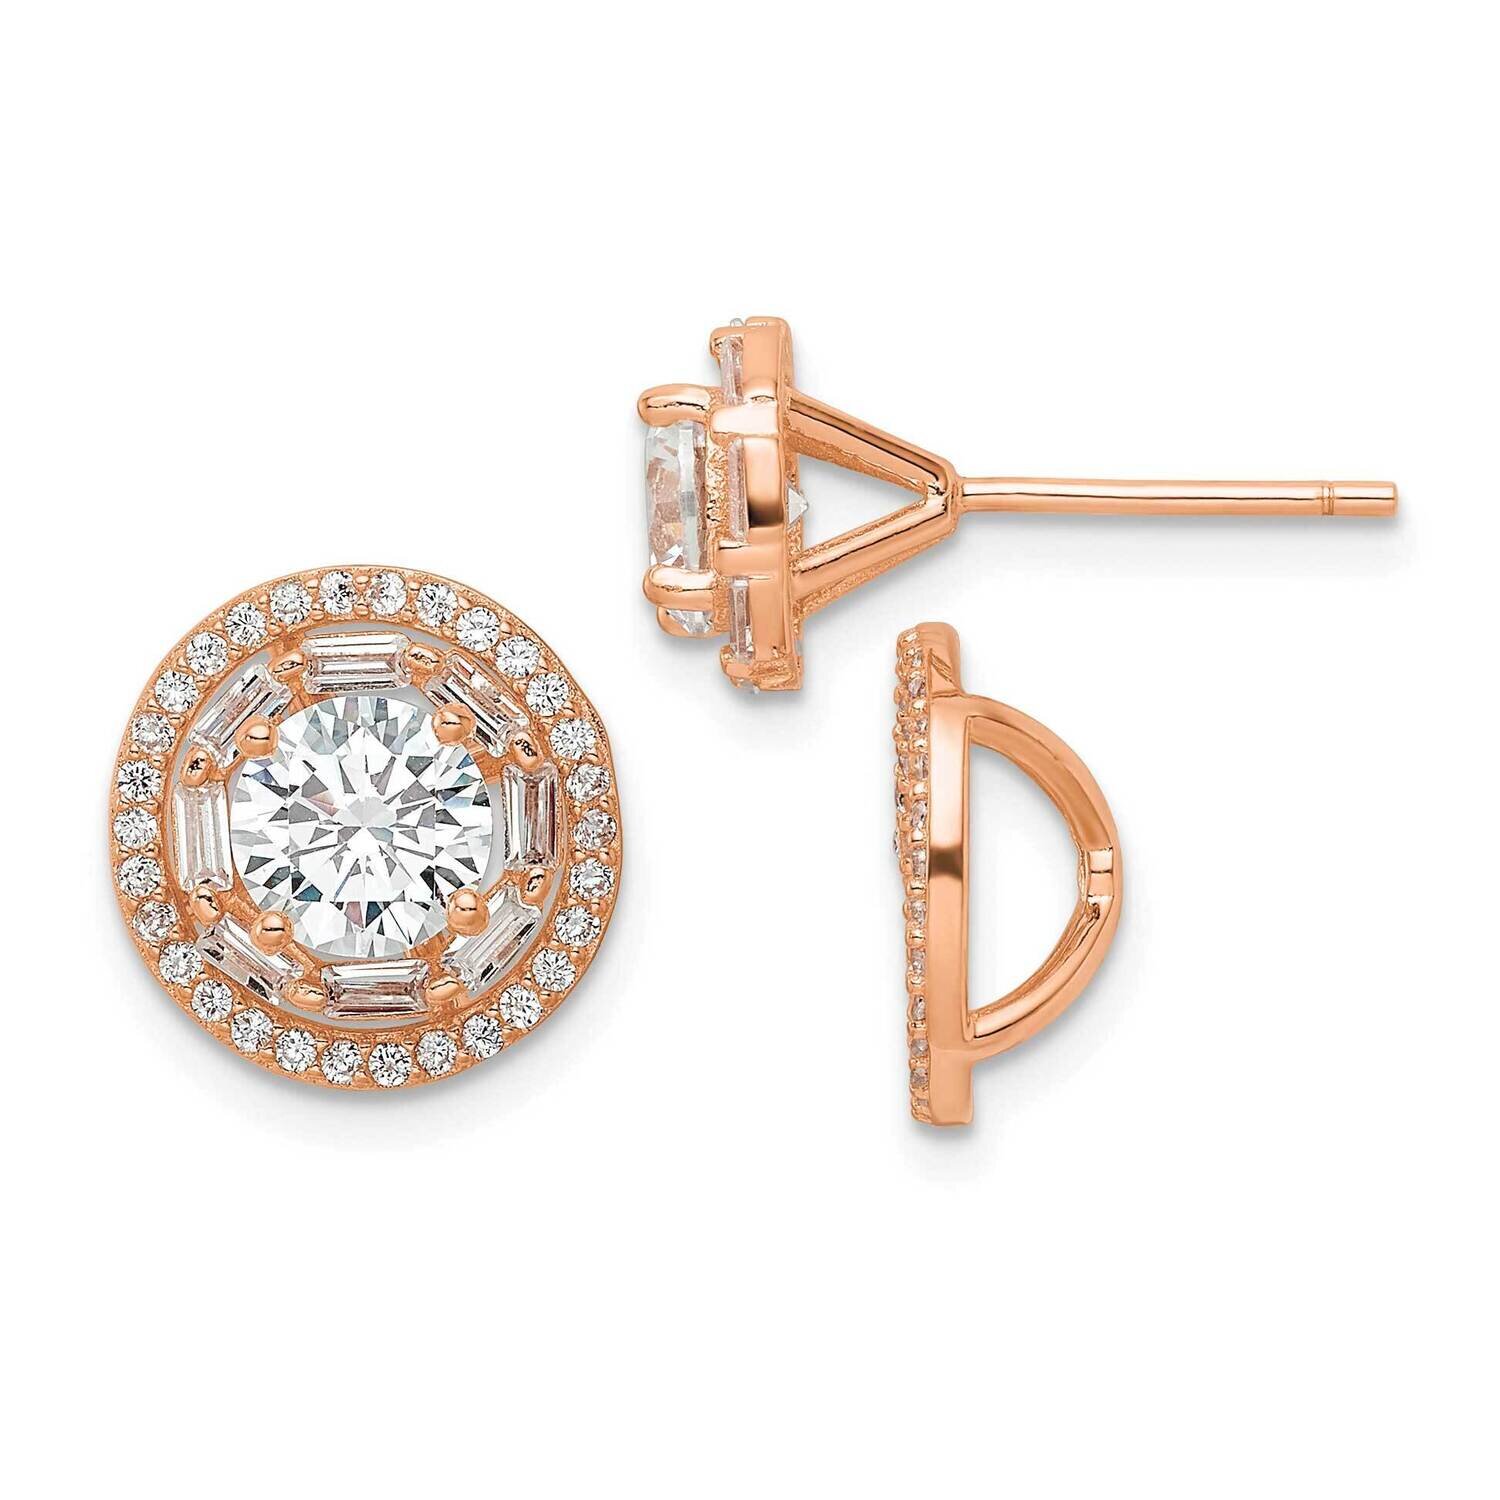 Rose-Tone CZ Diamond 6mm Stud Earrings with Jackets Sterling Silver Polished QE16129